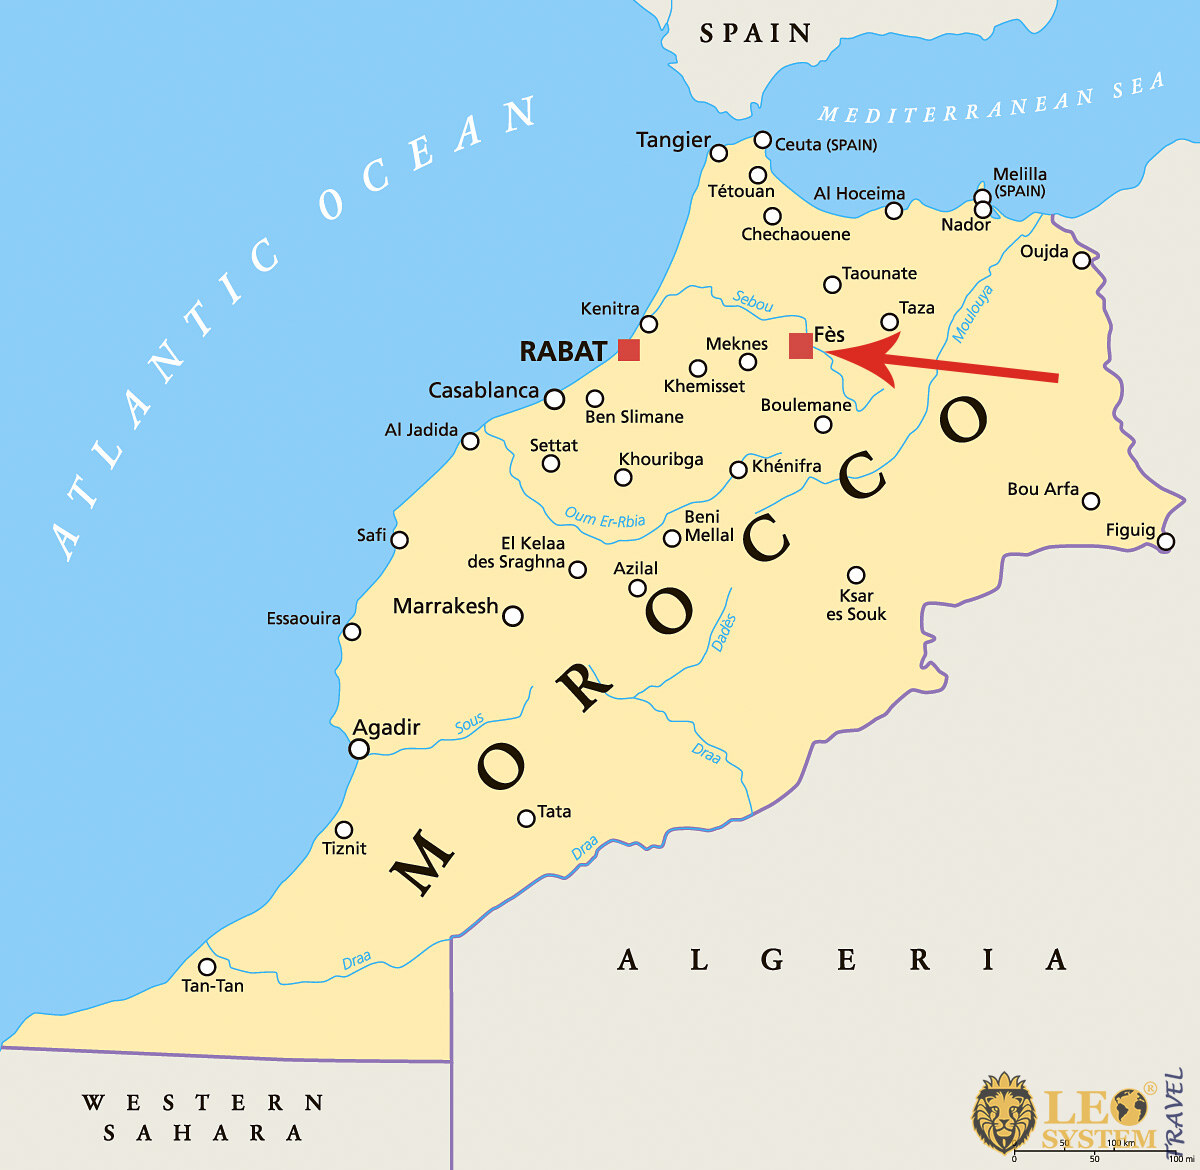 Image of a map showing the location of the city of Fes, Morocco